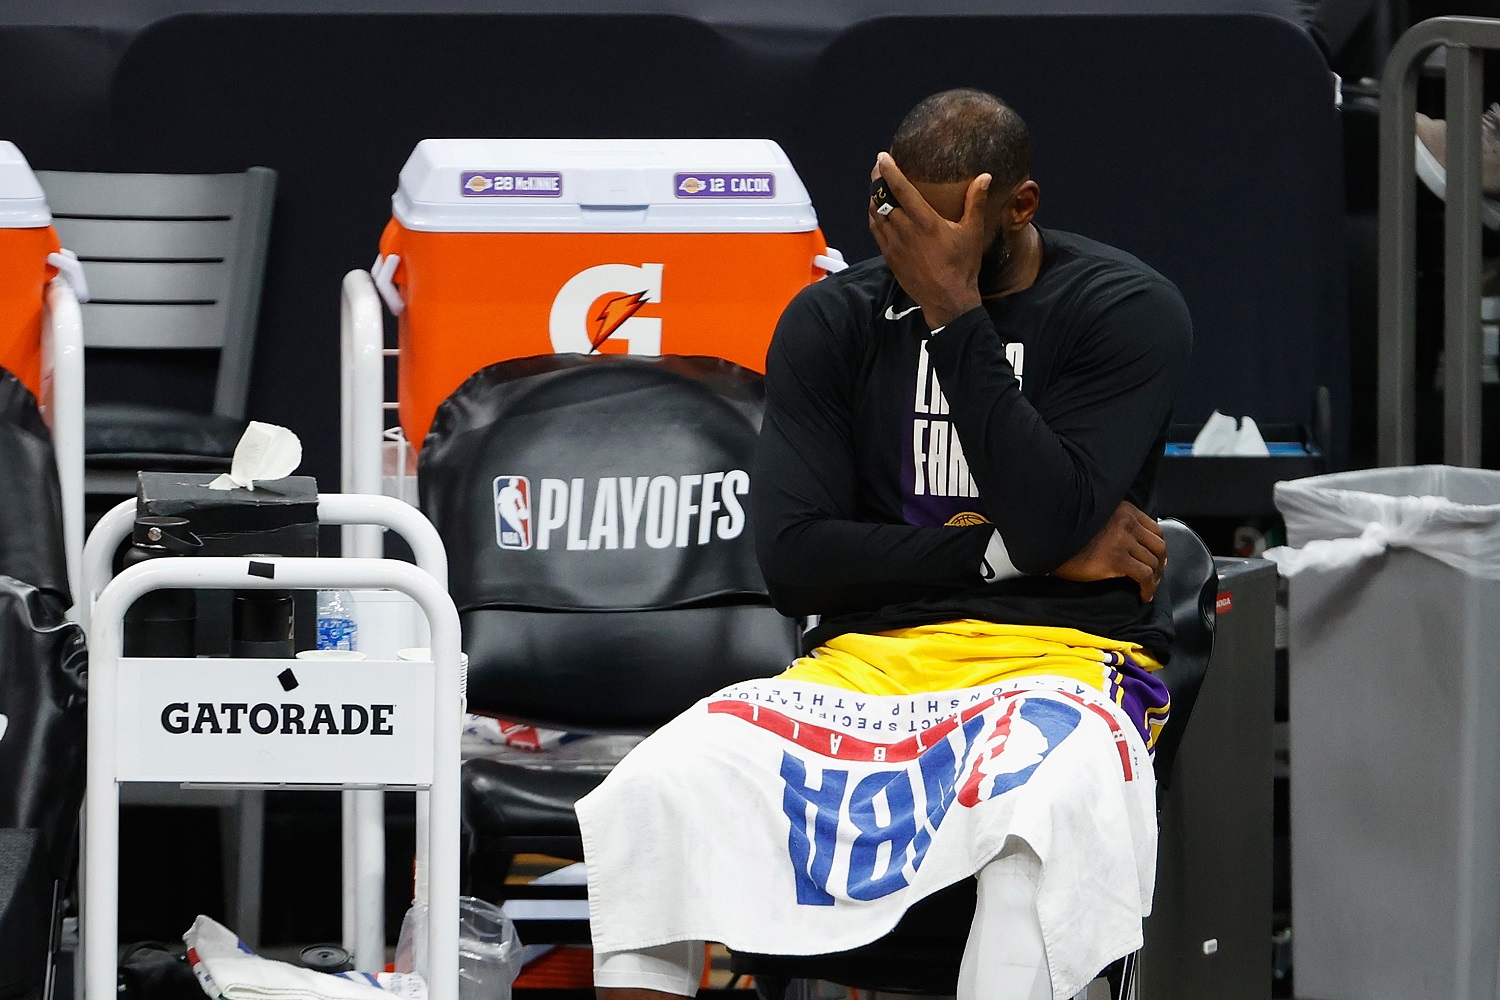 LeBron James of the Los Angeles Lakers reacts on the bench during Game 5 of the Western Conference first-round playoff series against the Phoenix Suns.